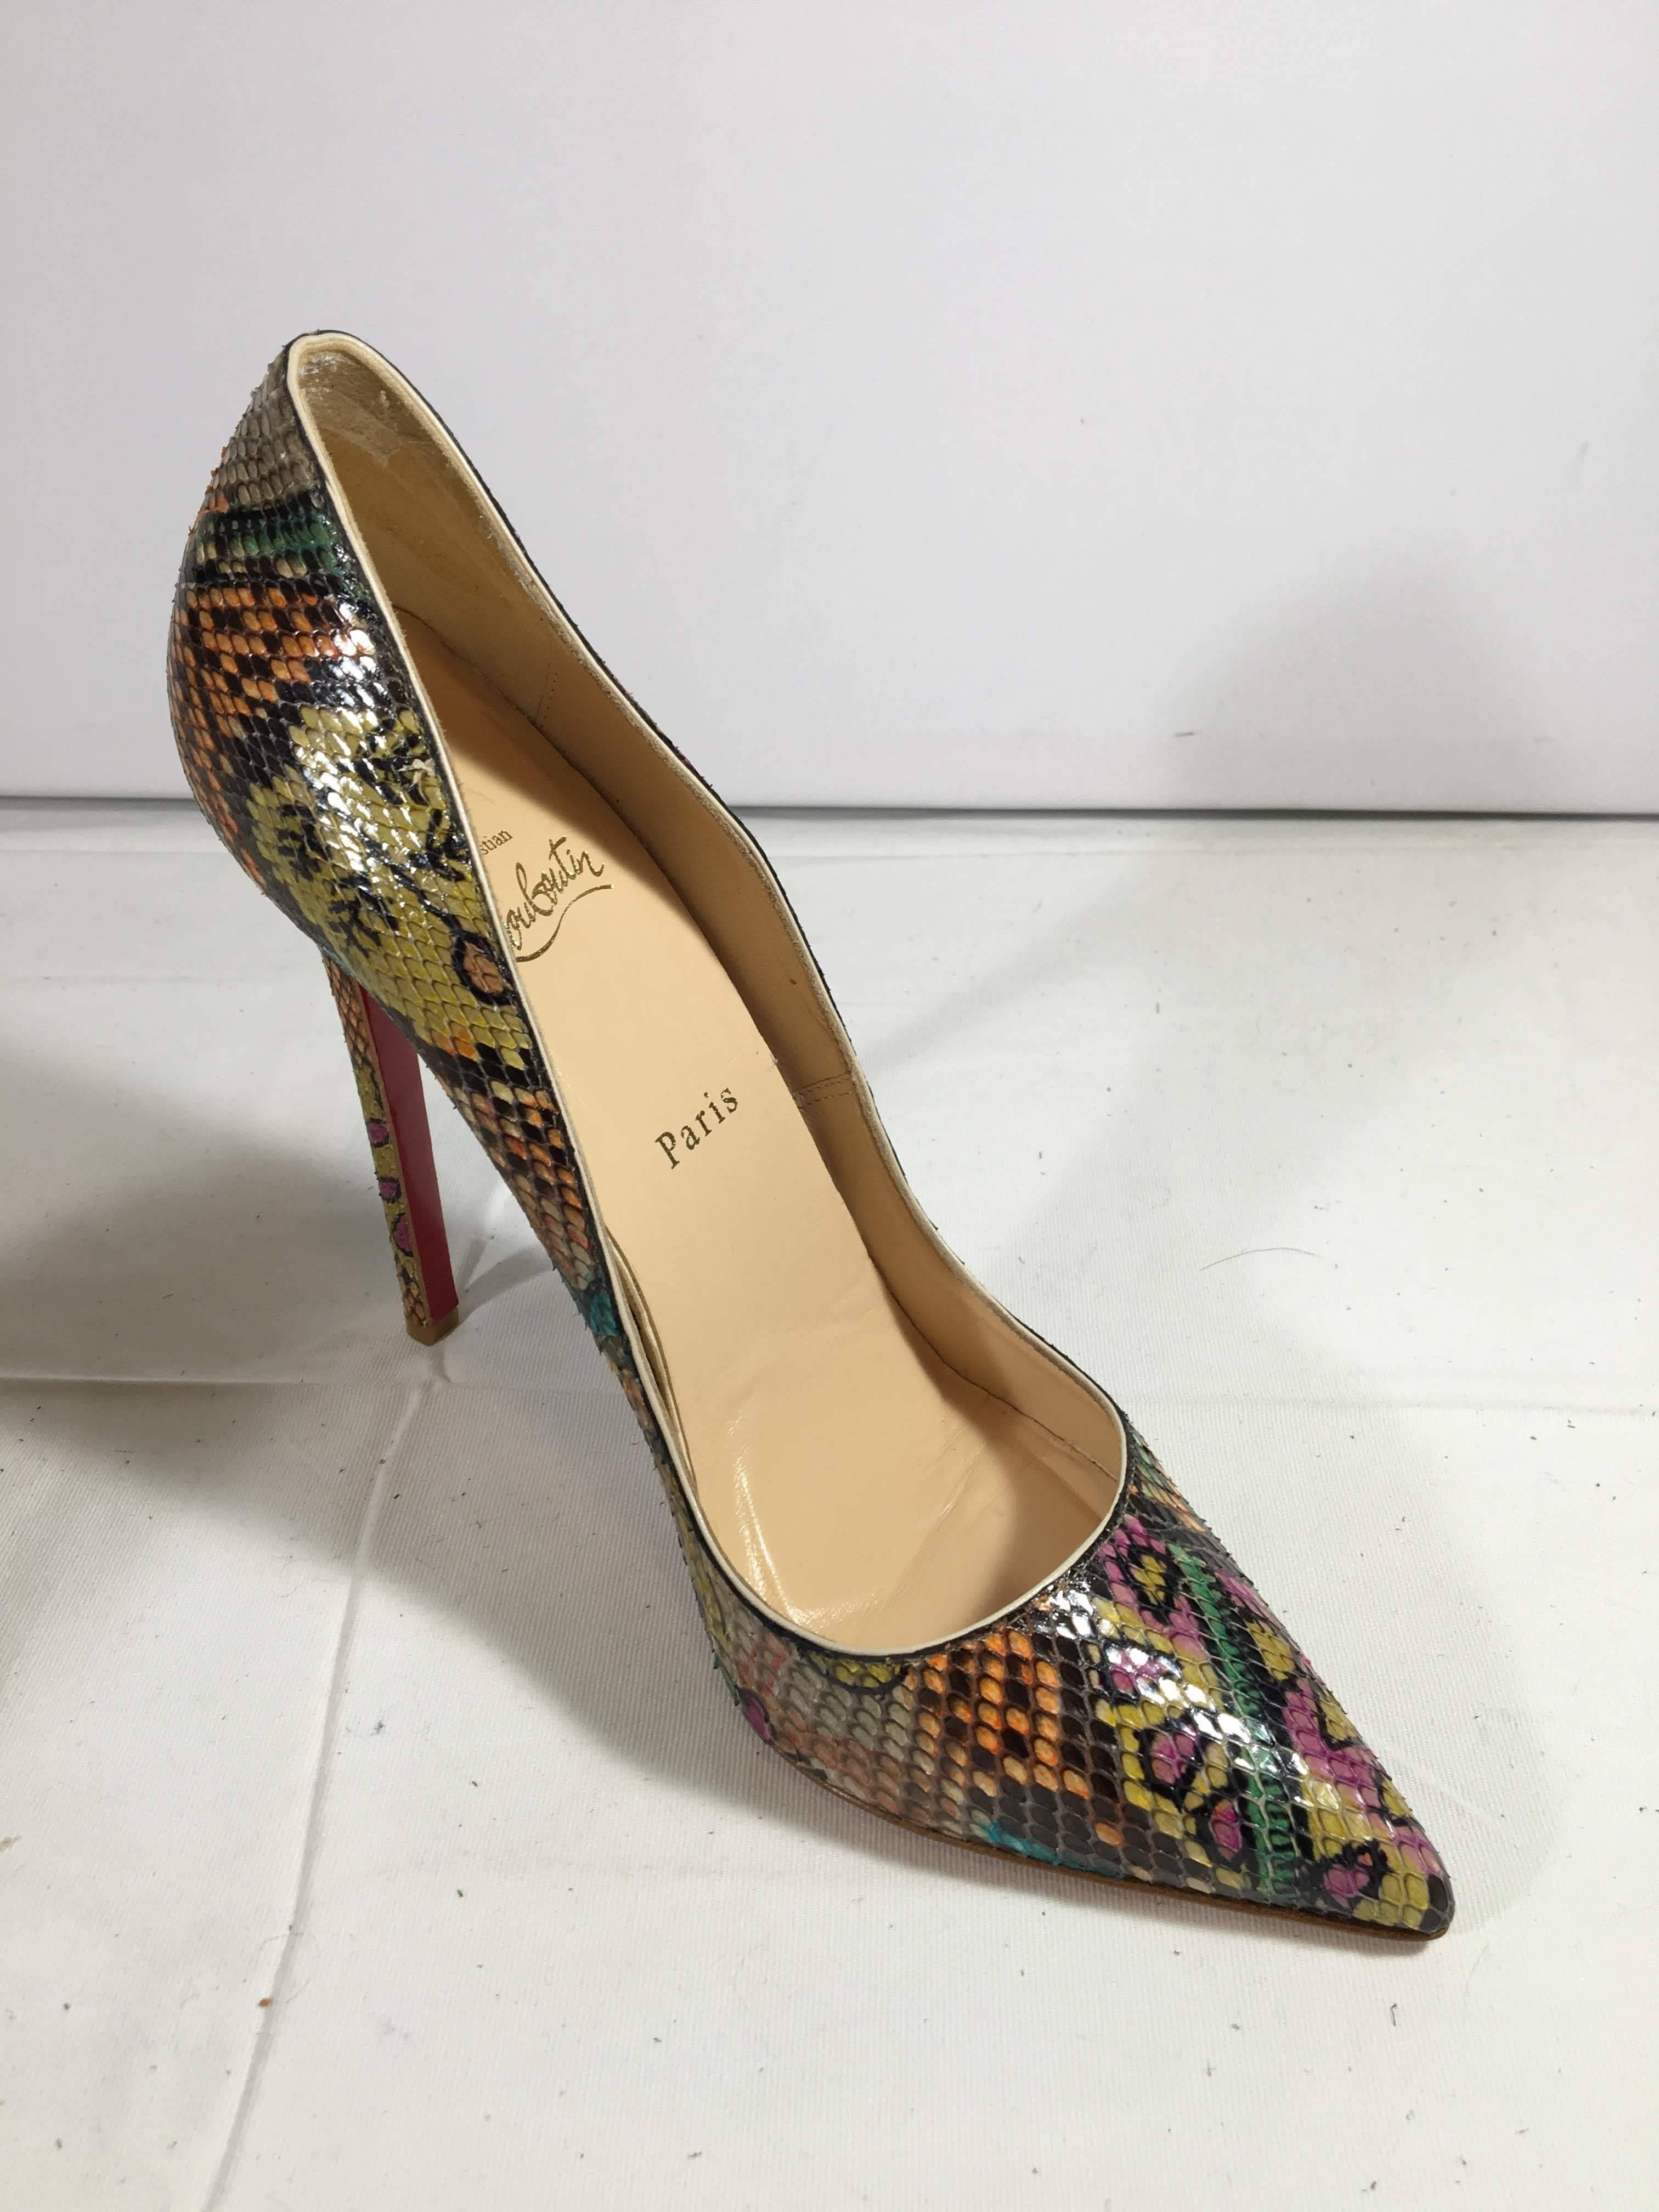 Christian Louboutin So Kate Multi-Color Python Pump with Pointed Toe in Size 41.